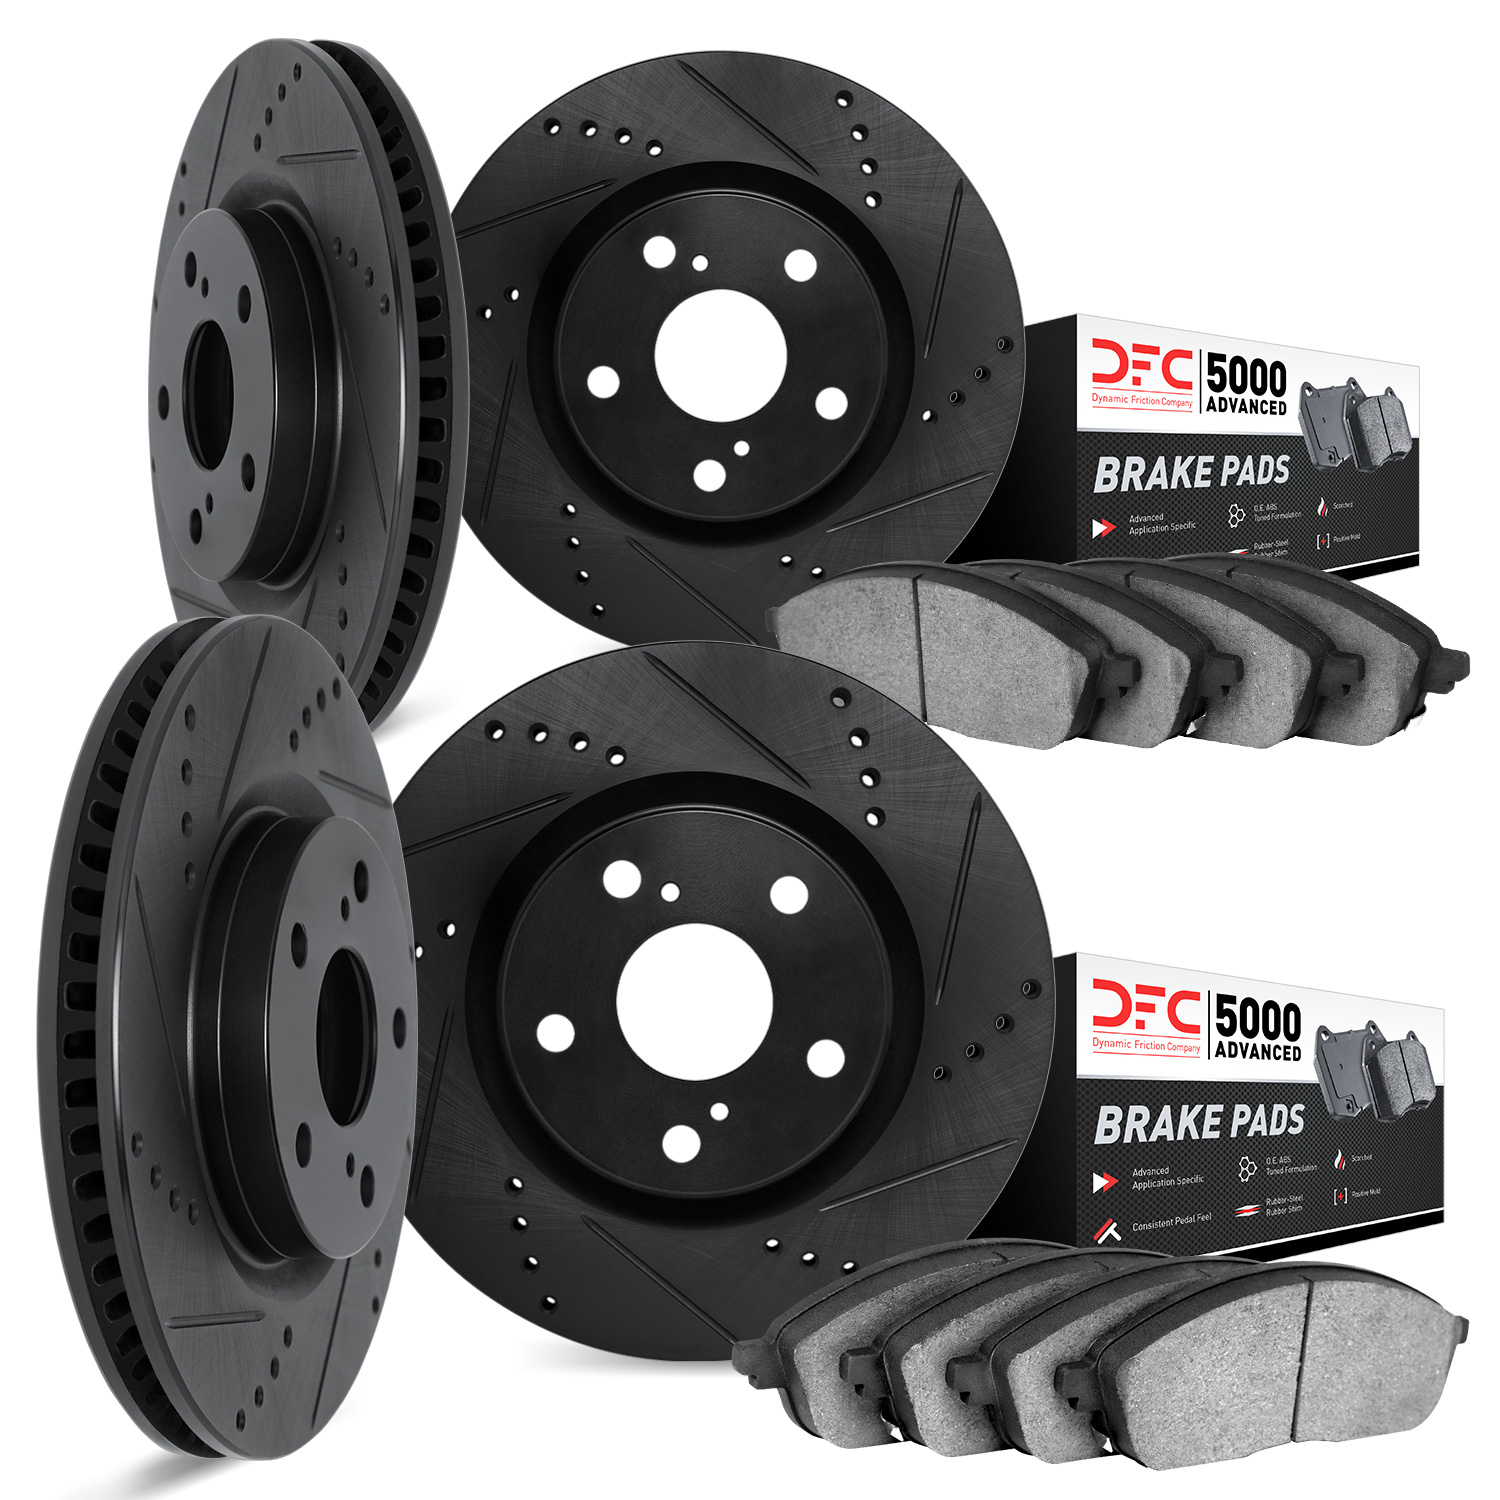 8504-63010 Drilled/Slotted Brake Rotors w/5000 Advanced Brake Pads Kit [Black], Fits Select Mercedes-Benz, Position: Front and R